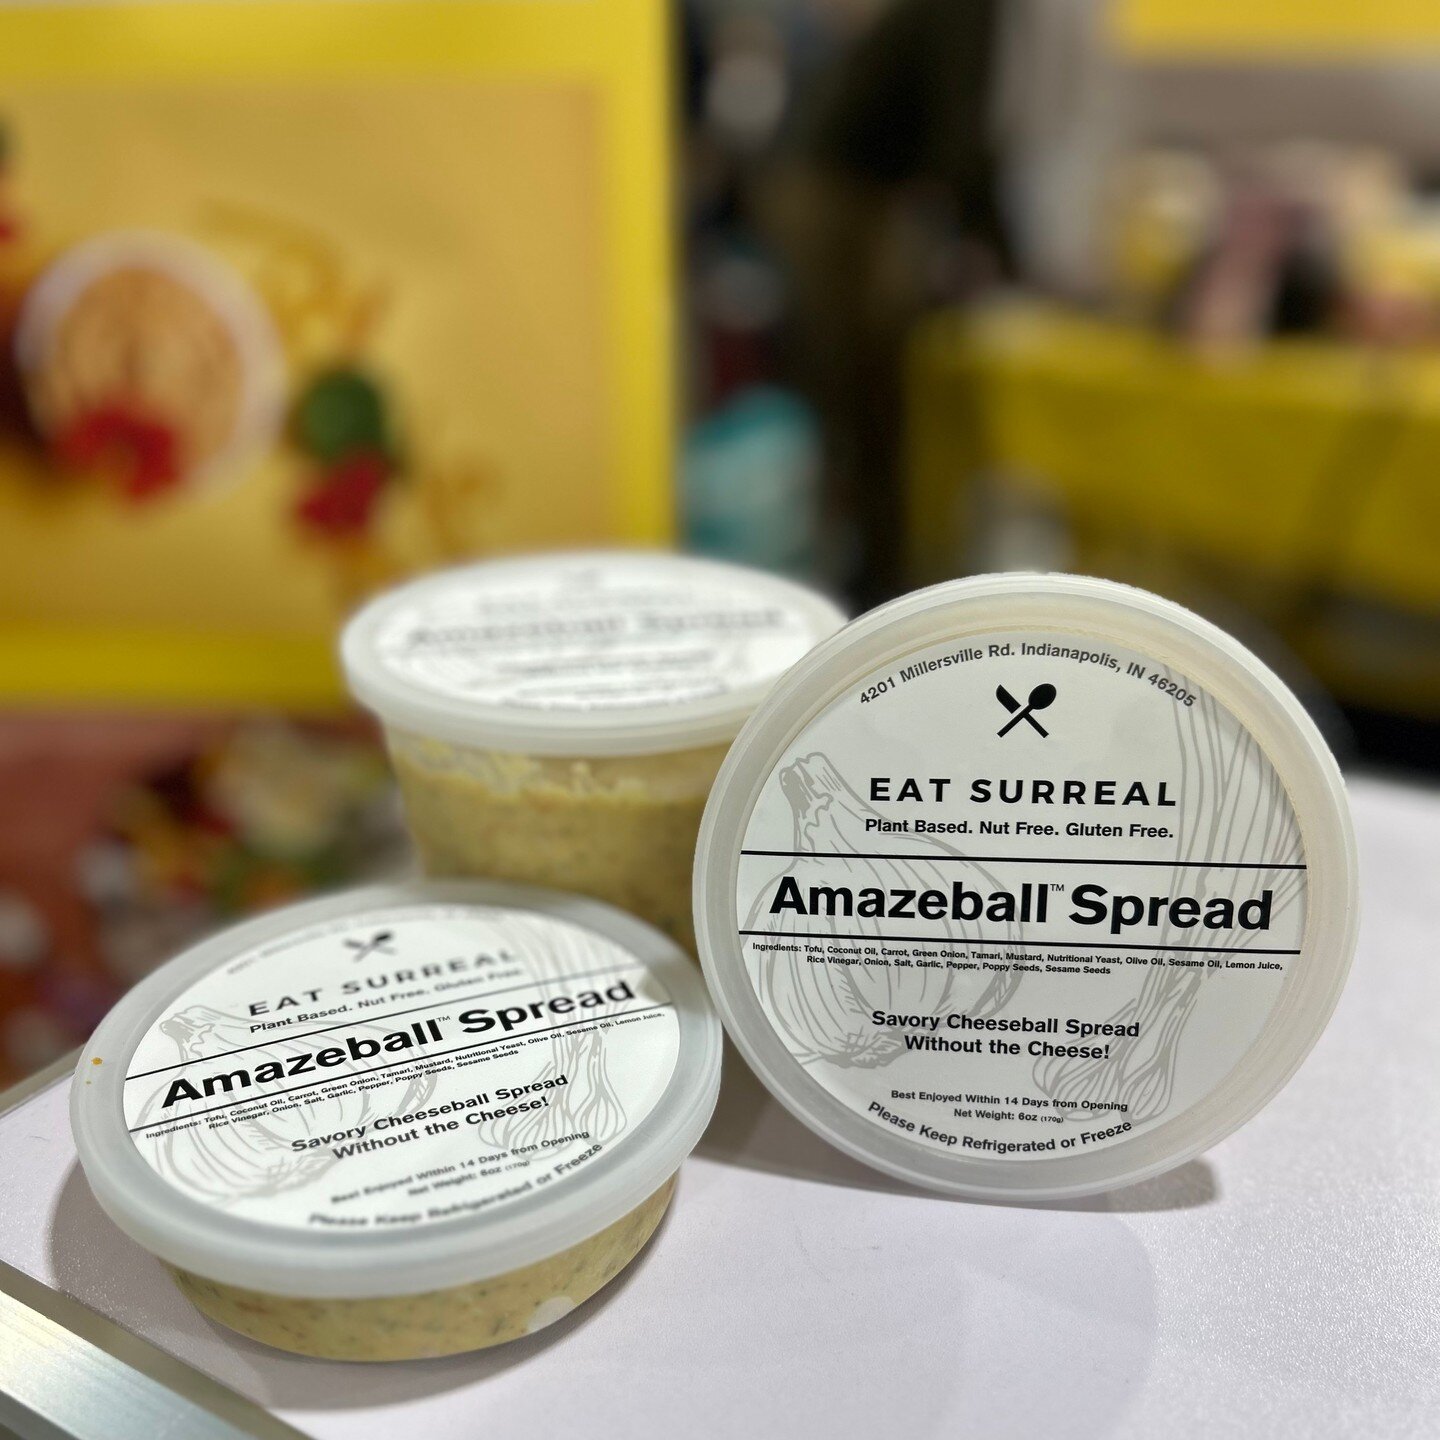 Dairy-free, Nut-free, Gluten-free deliciousness now in 16oz size for $20 at our market events!

#cheesewithoutcheese #eatsurreal #indianapolis #foodie #spreads #partyfood #amazeball #plantbasedcheeseball #wfpb #indiana #dairyfree #glutenfree #nutfree